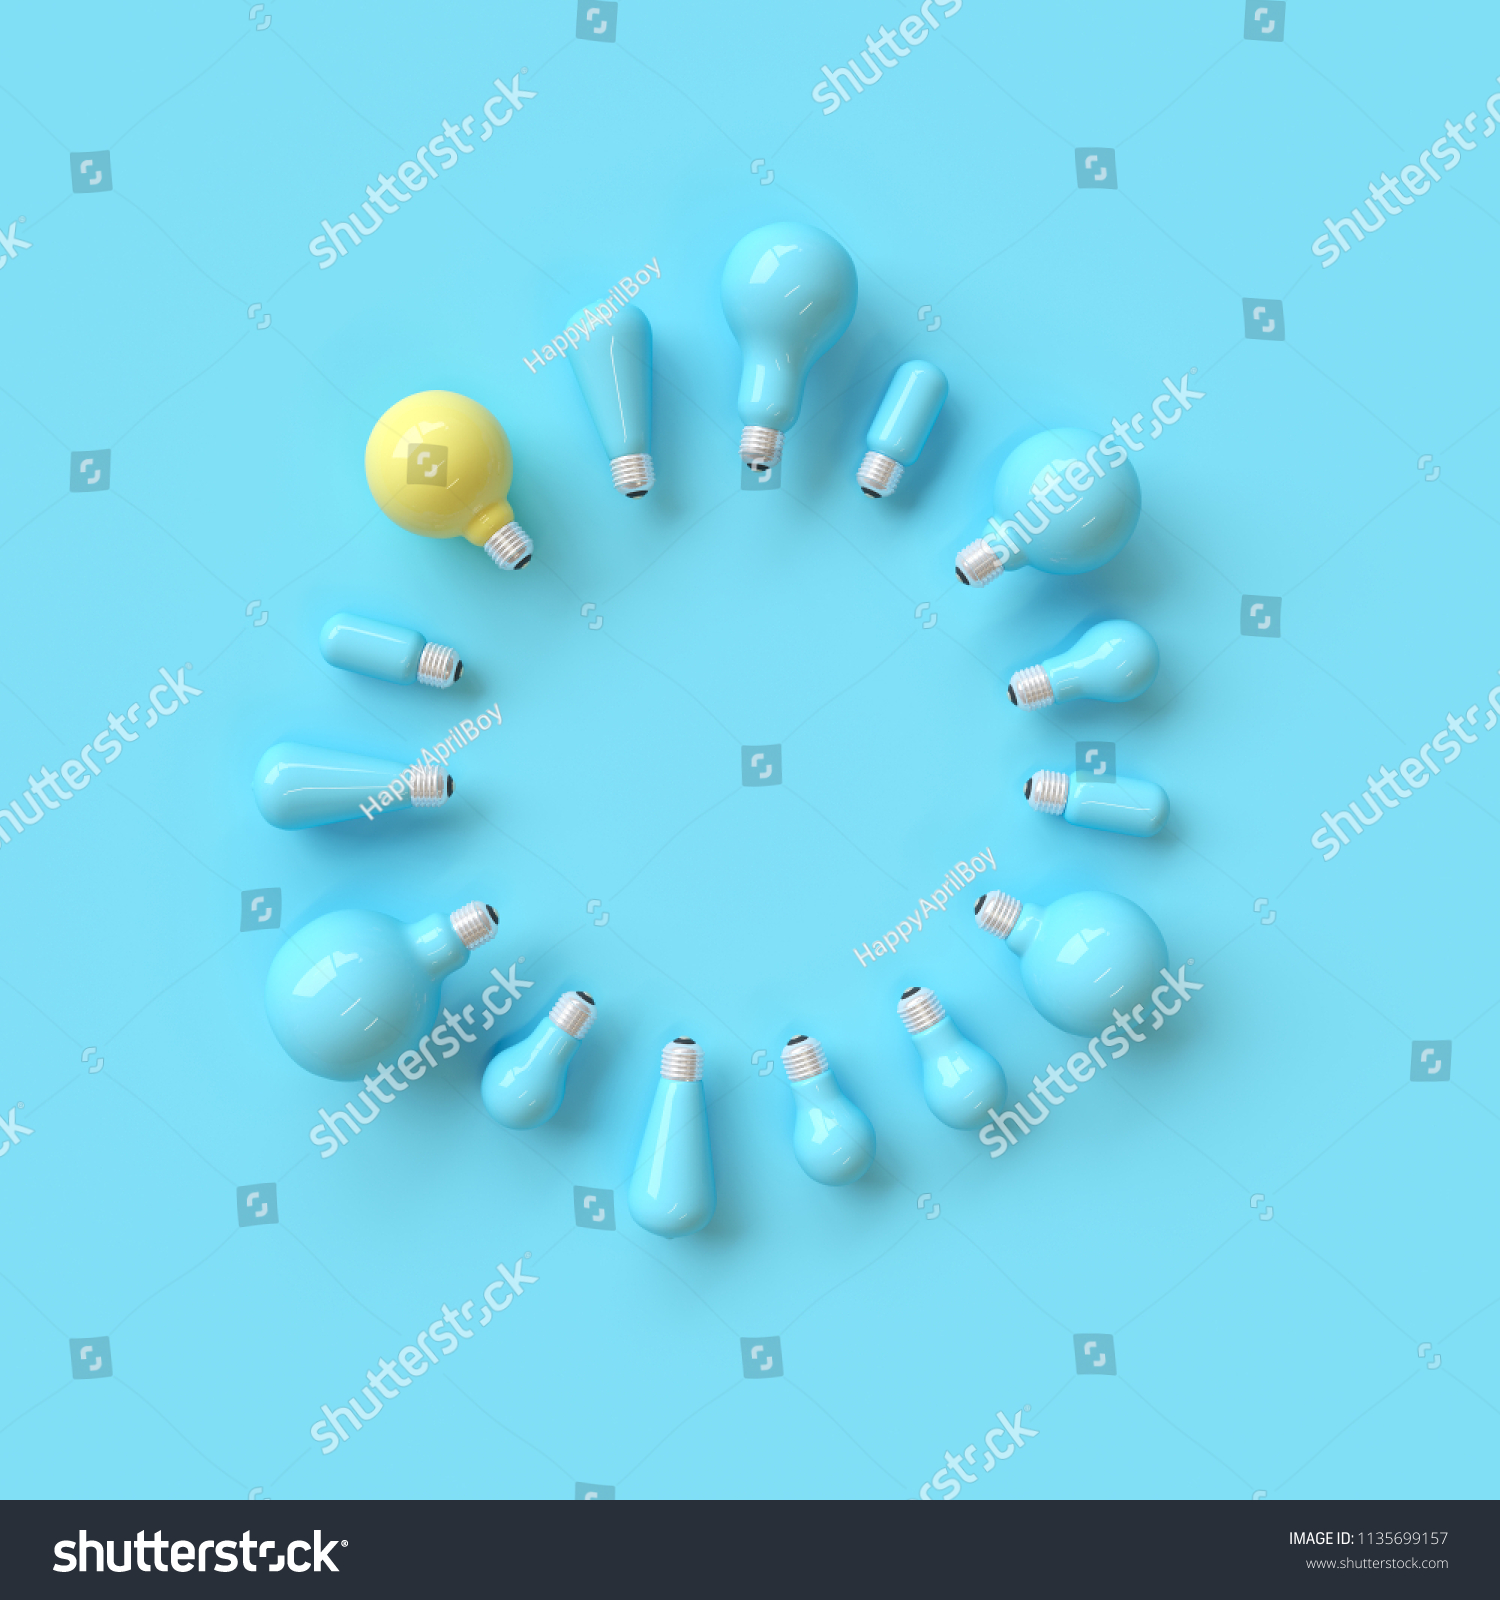 Outstanding different yellow lightbulb  among blue  lightbulb with circle shape concept on blue backgrond. minimal concept. top view flat lay. #1135699157